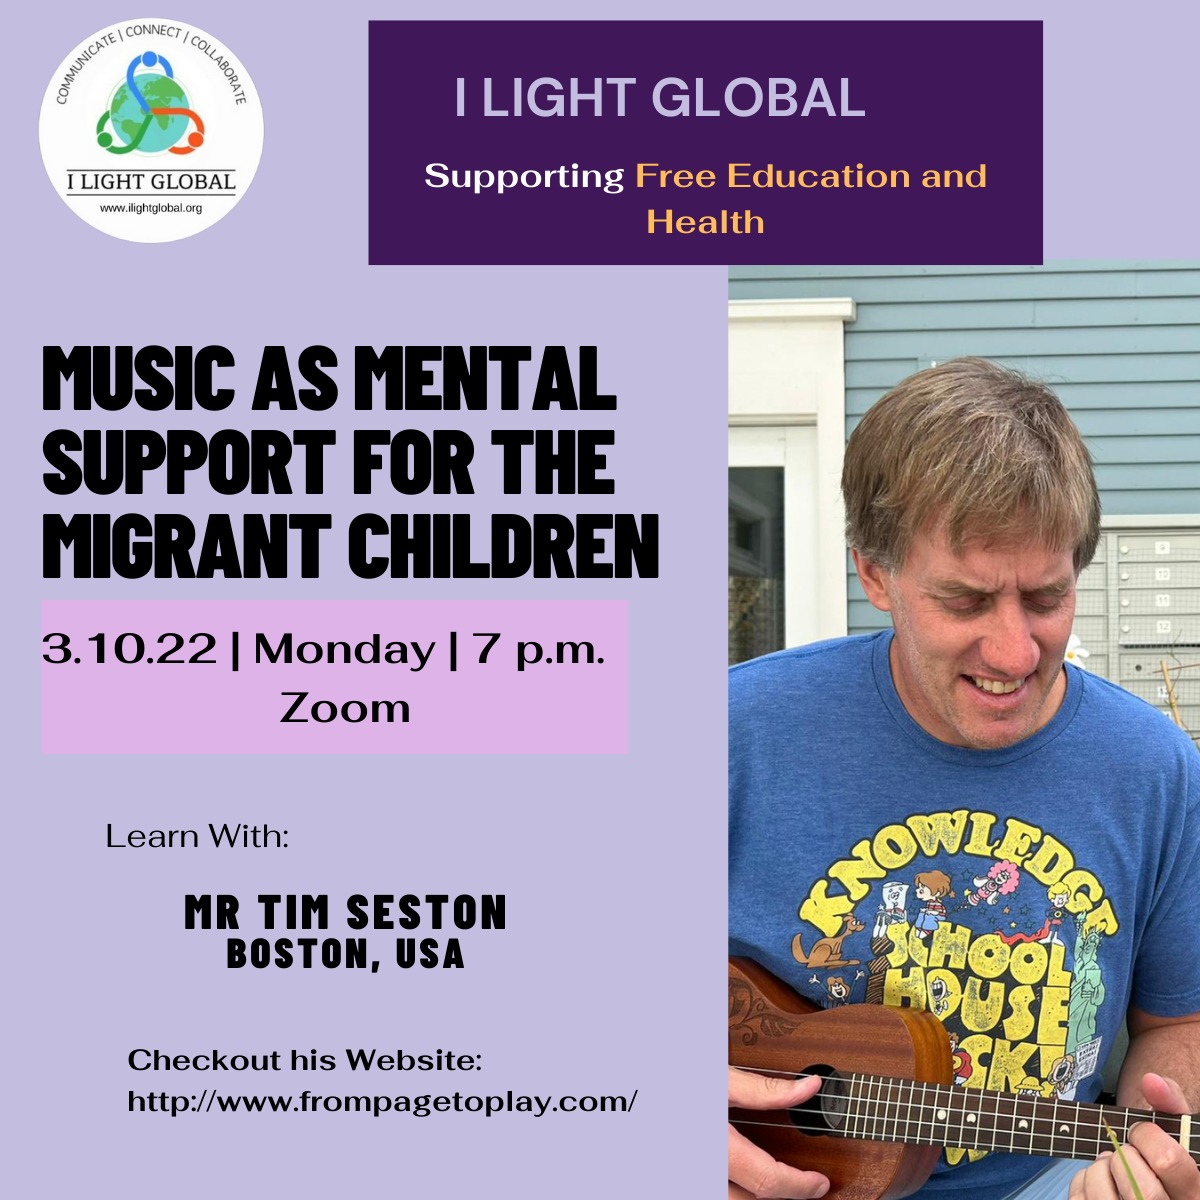 Music as mental support for migrant children